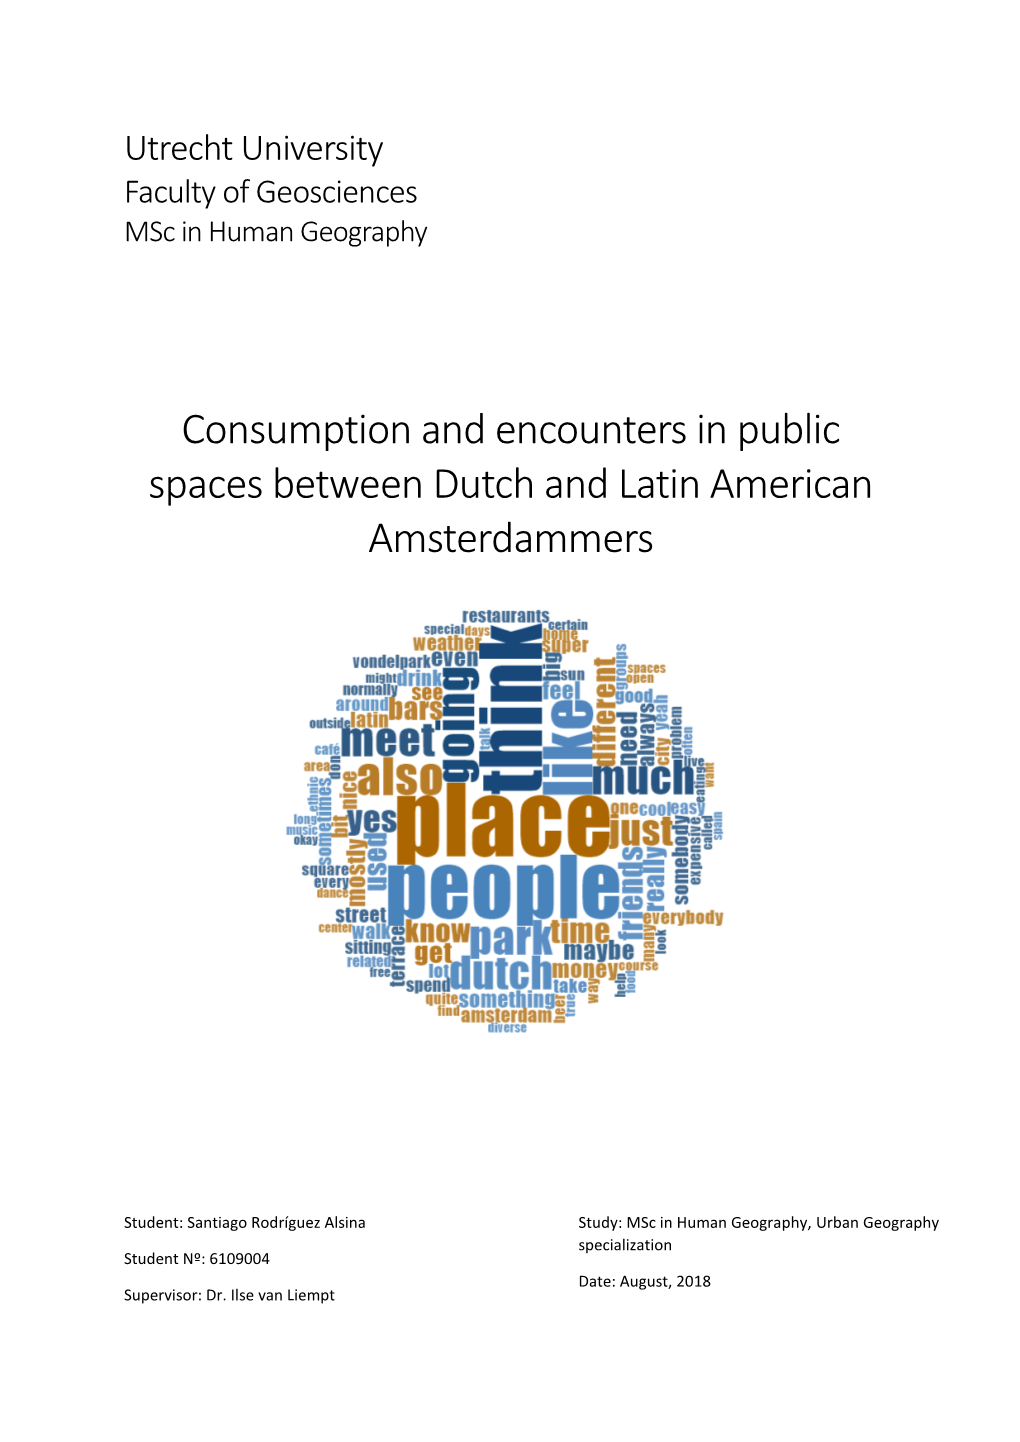 Consumption and Encounters in Public Spaces Between Dutch and Latin American Amsterdammers